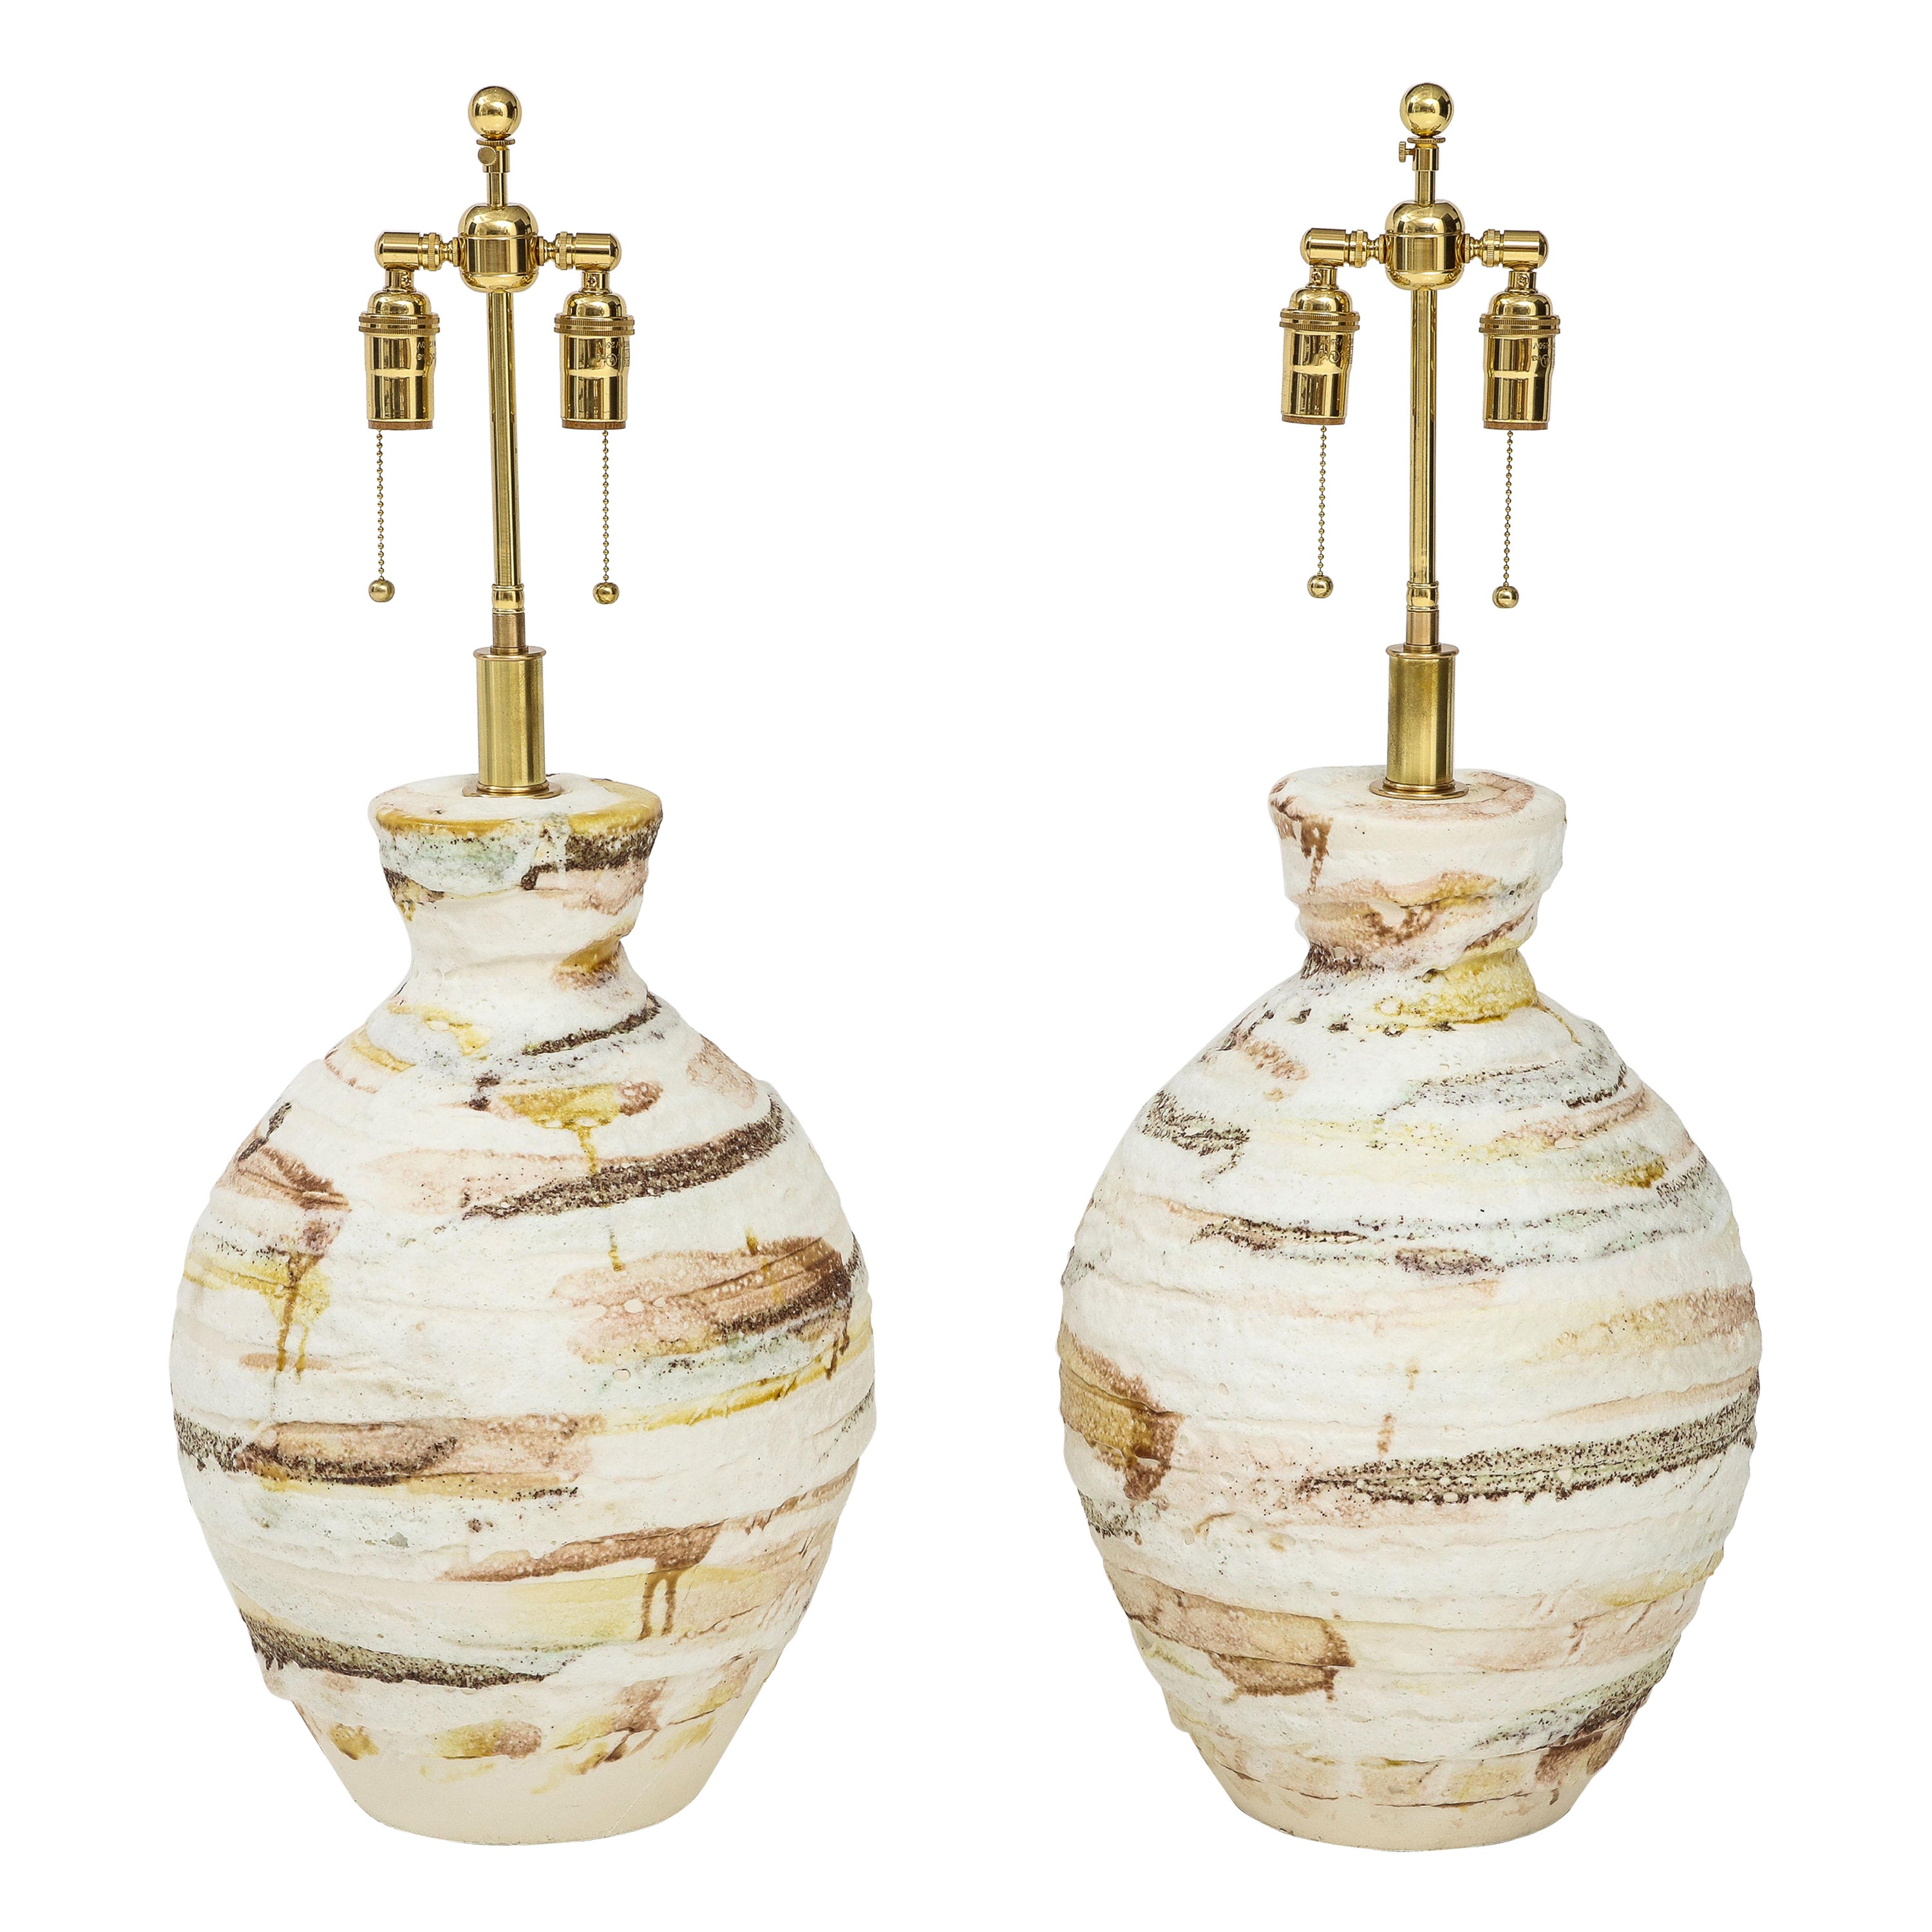 Pair of Large Mid - Century Modern Ceramic Lamps with a Textured Glazed Finish. For Sale